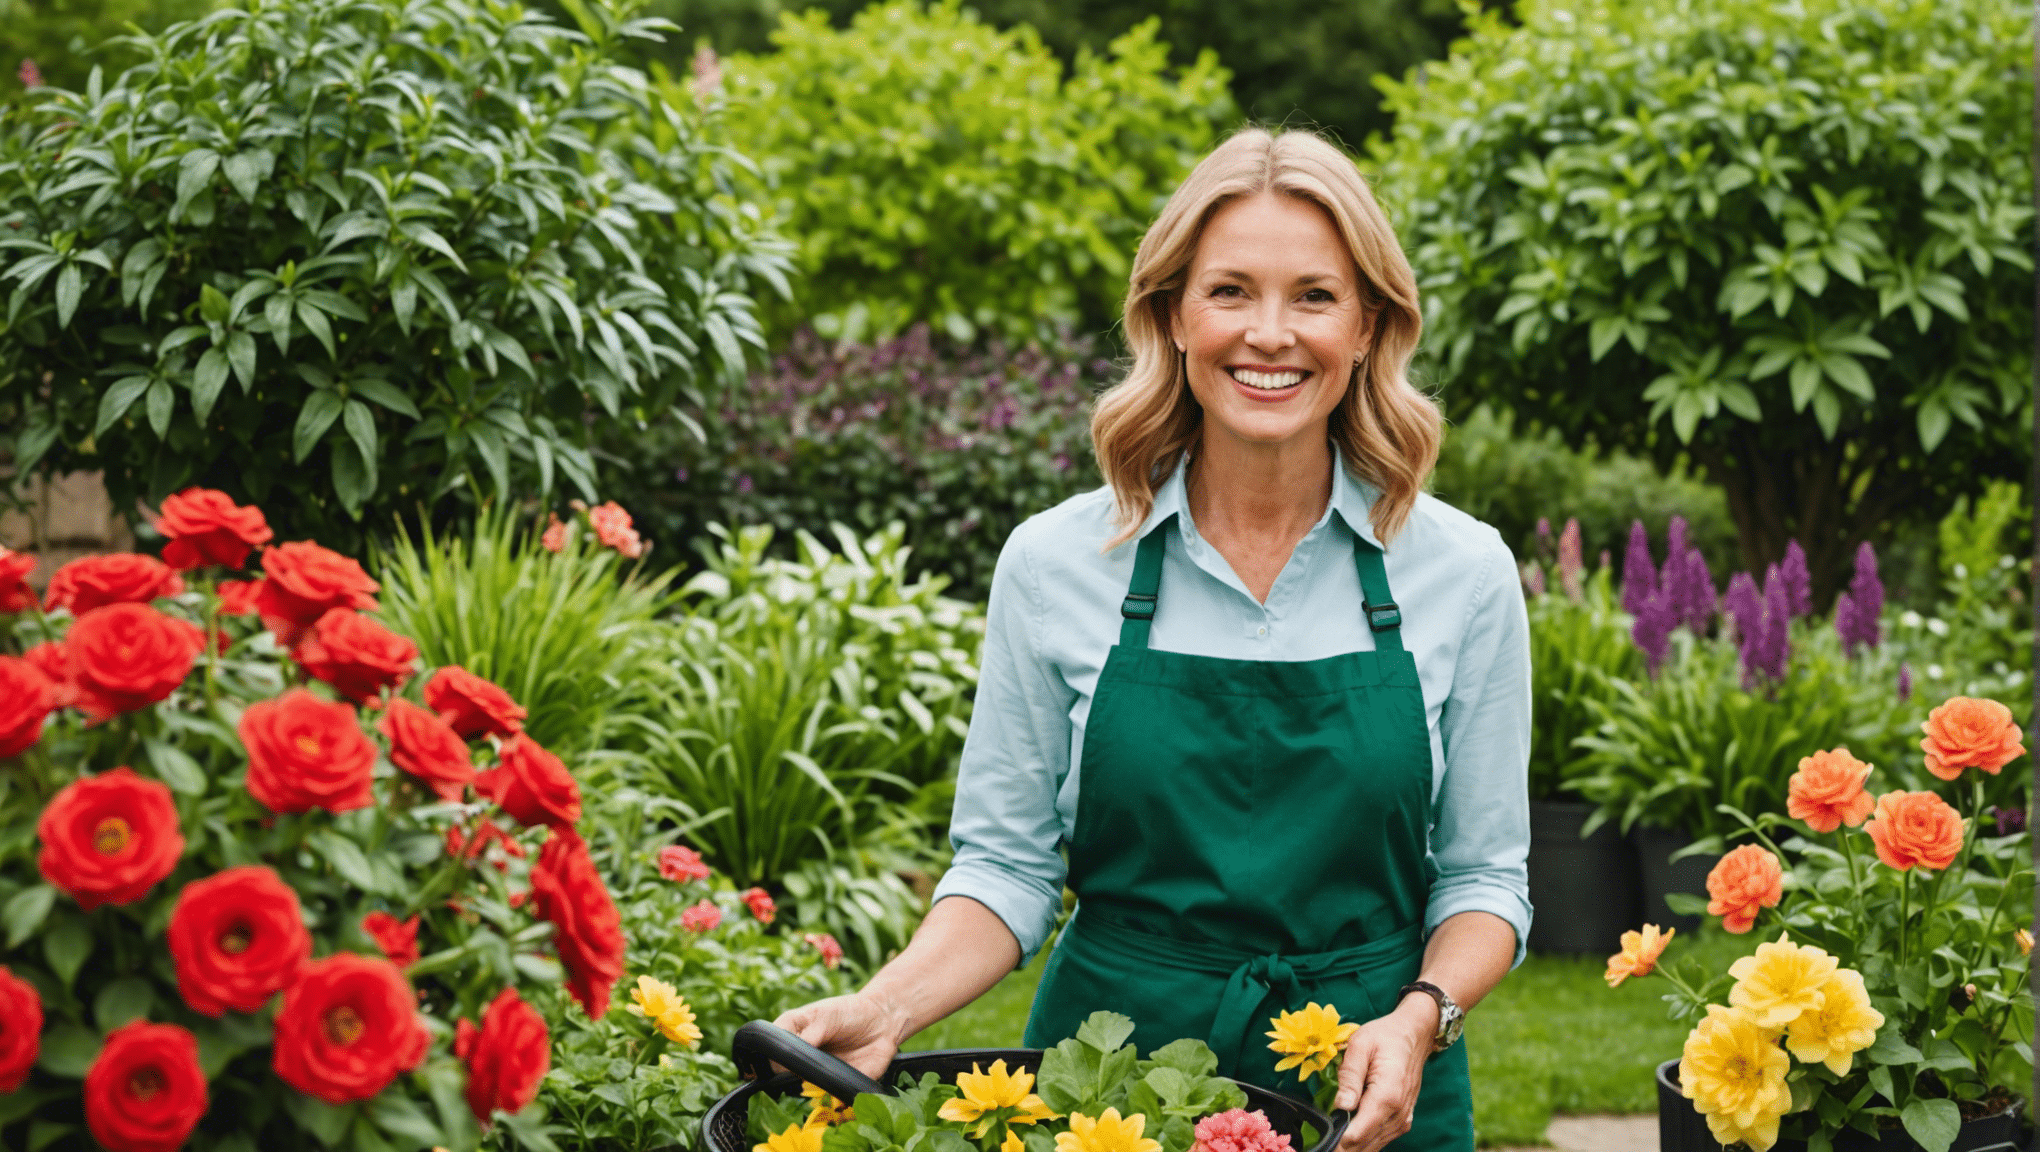 explore gardening tips, techniques, and inspiration on our blog. get expert advice on plant care, landscaping, and creating beautiful outdoor spaces.